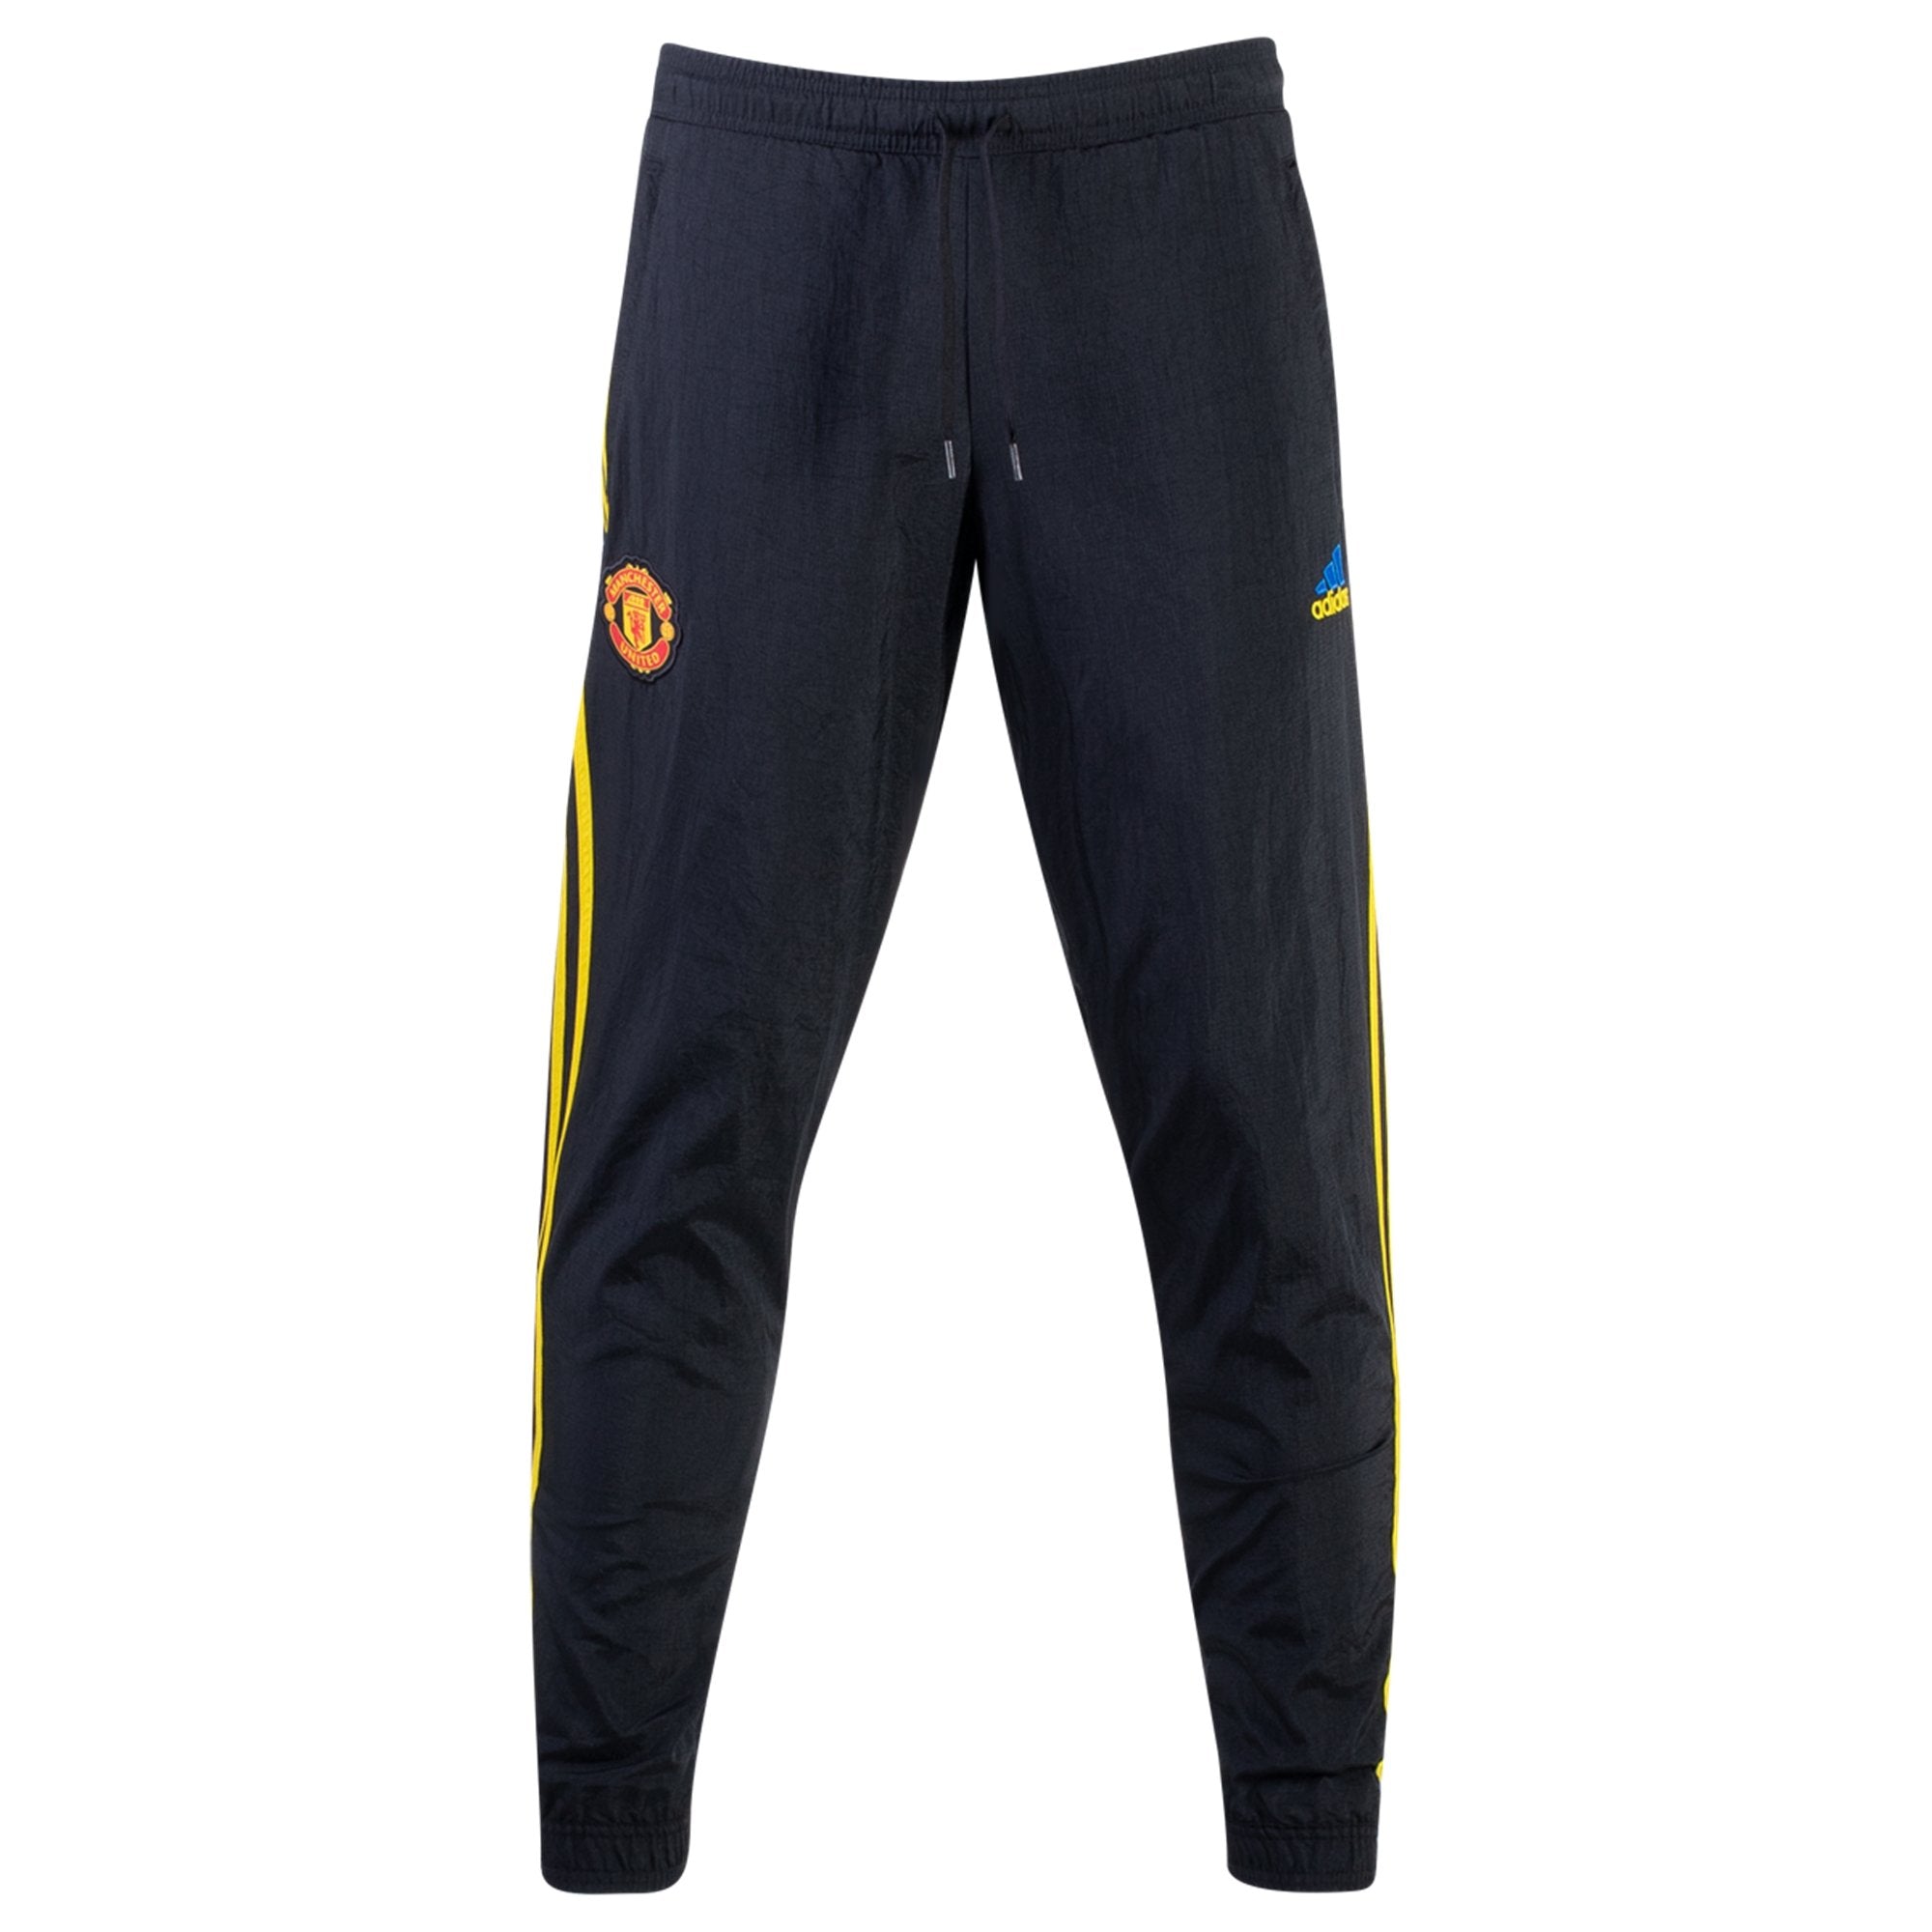 Women's Train Icons Woven Pant from adidas